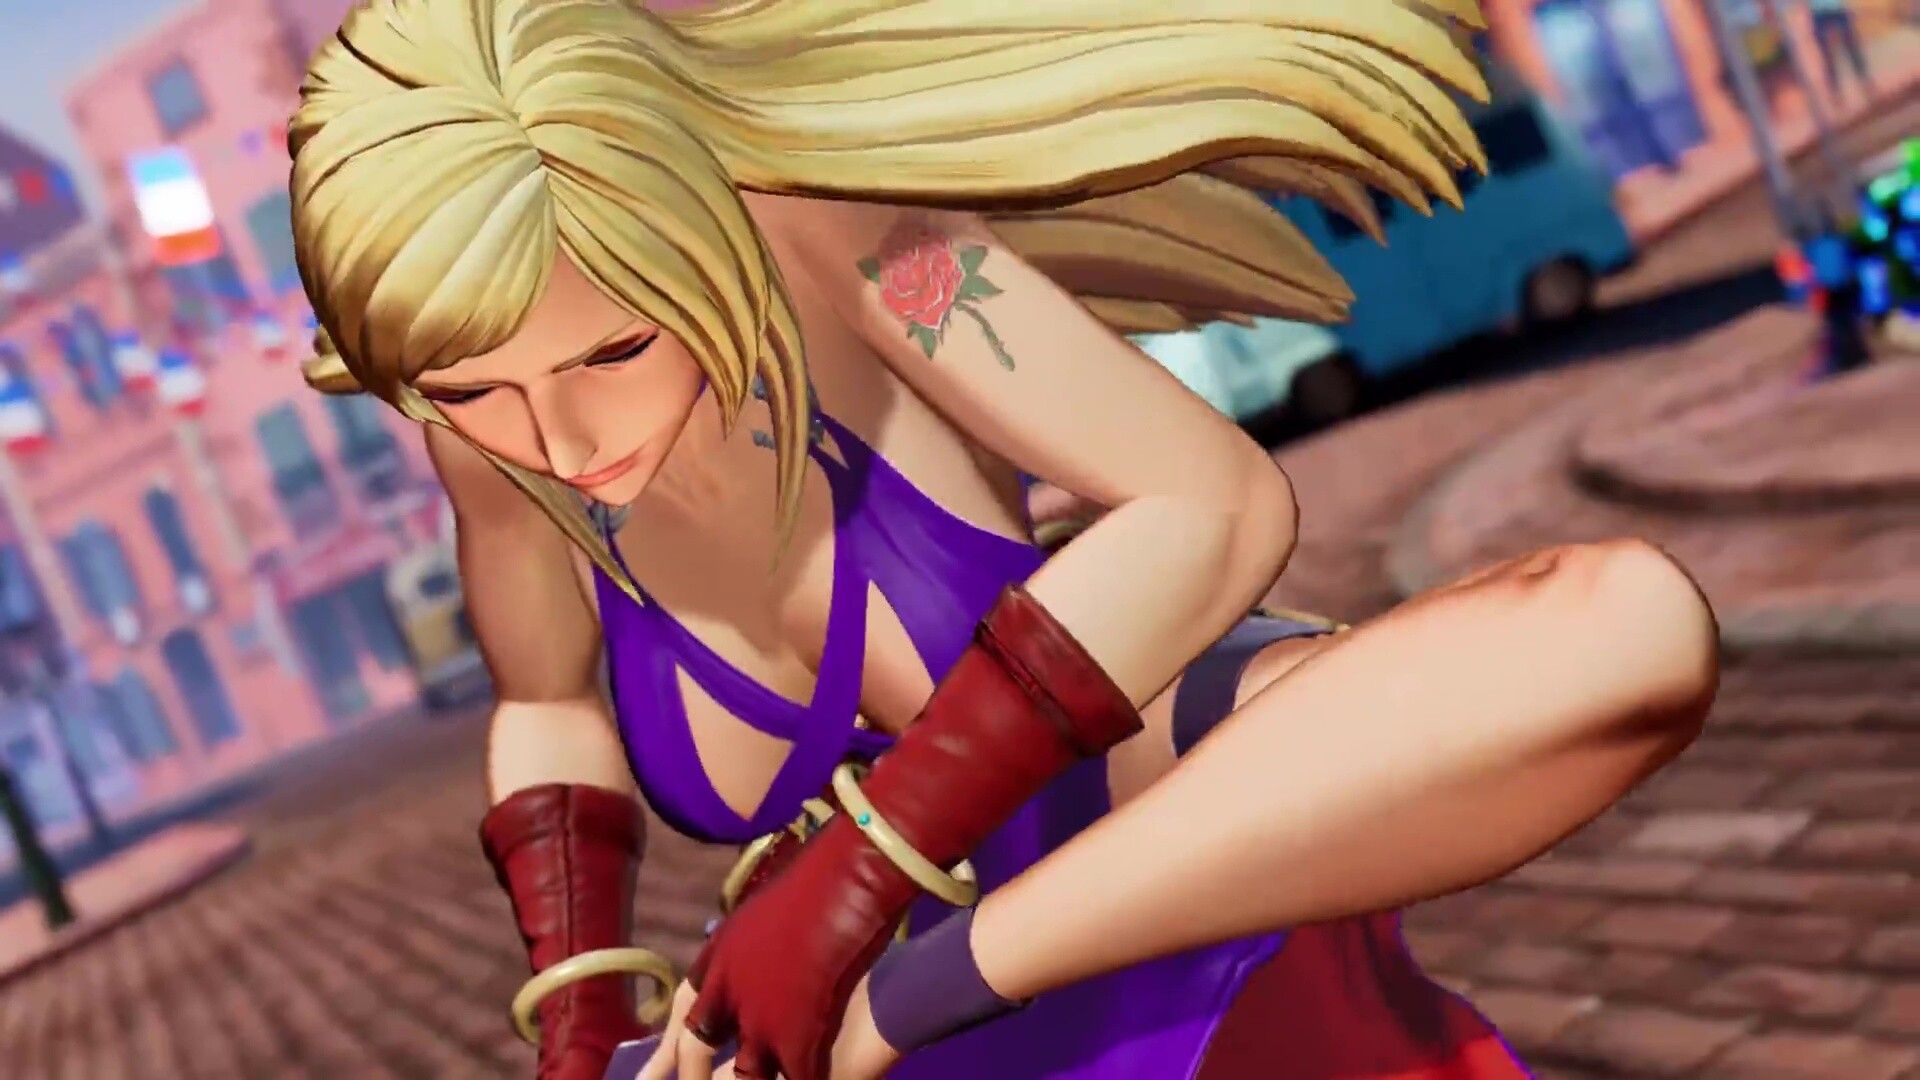 THE KING OF FIGHTERS XV B. Jenny enters the DLC in an erotic dress with and rounded thighs 18